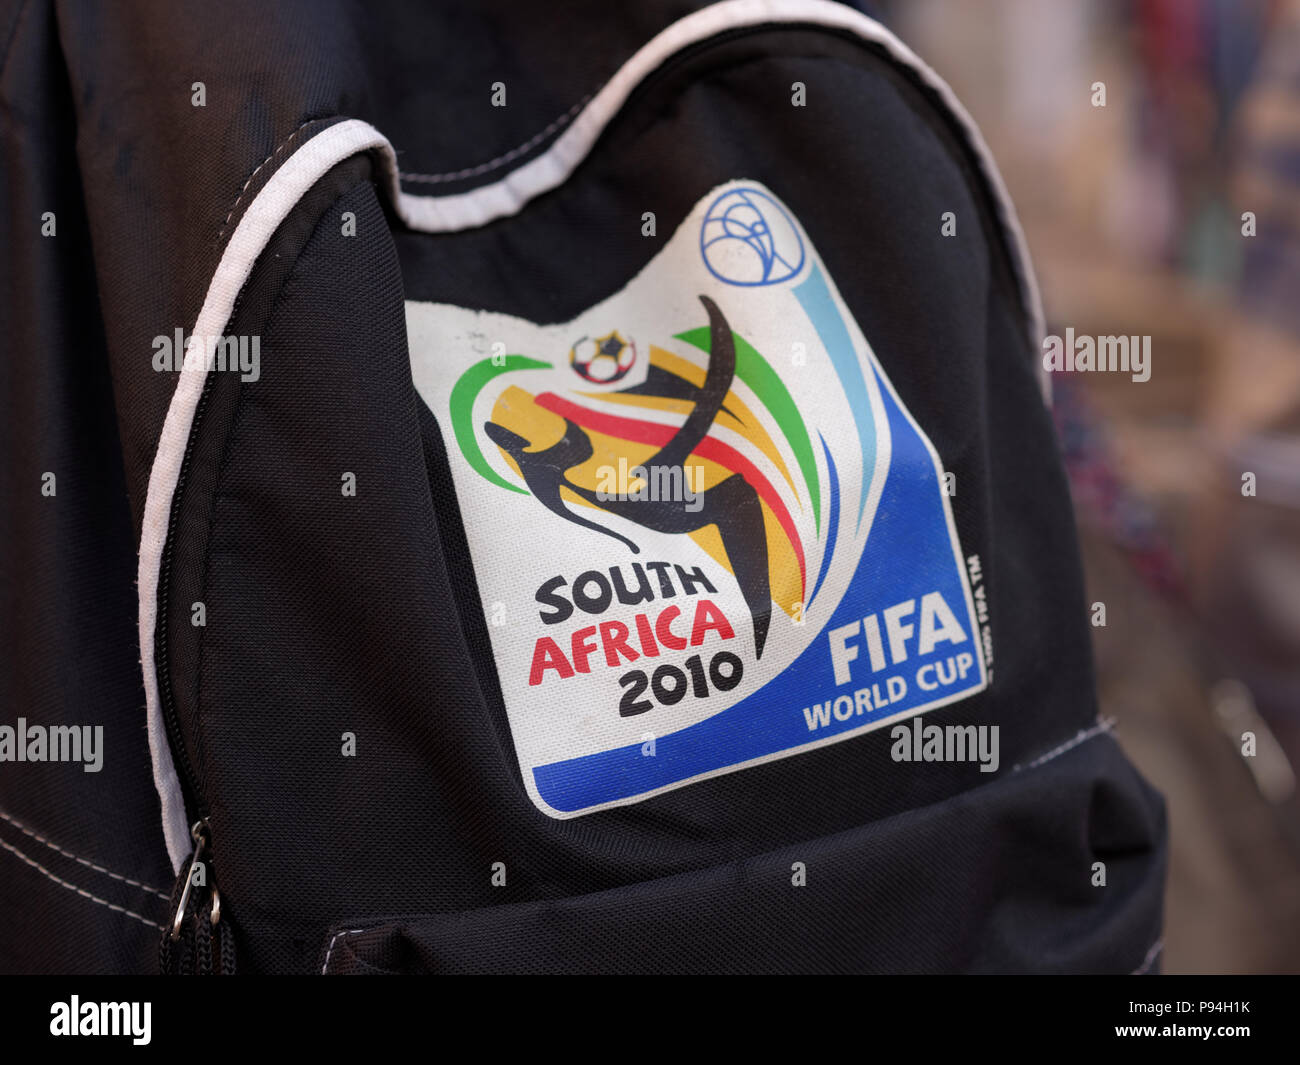 St. Petersburg, Russia - July 13, 2018: Logo of FIFA World Cup South Africa 2010 on the backpack of a football fan visited FIFA World Cup Russia 2018. Stock Photo